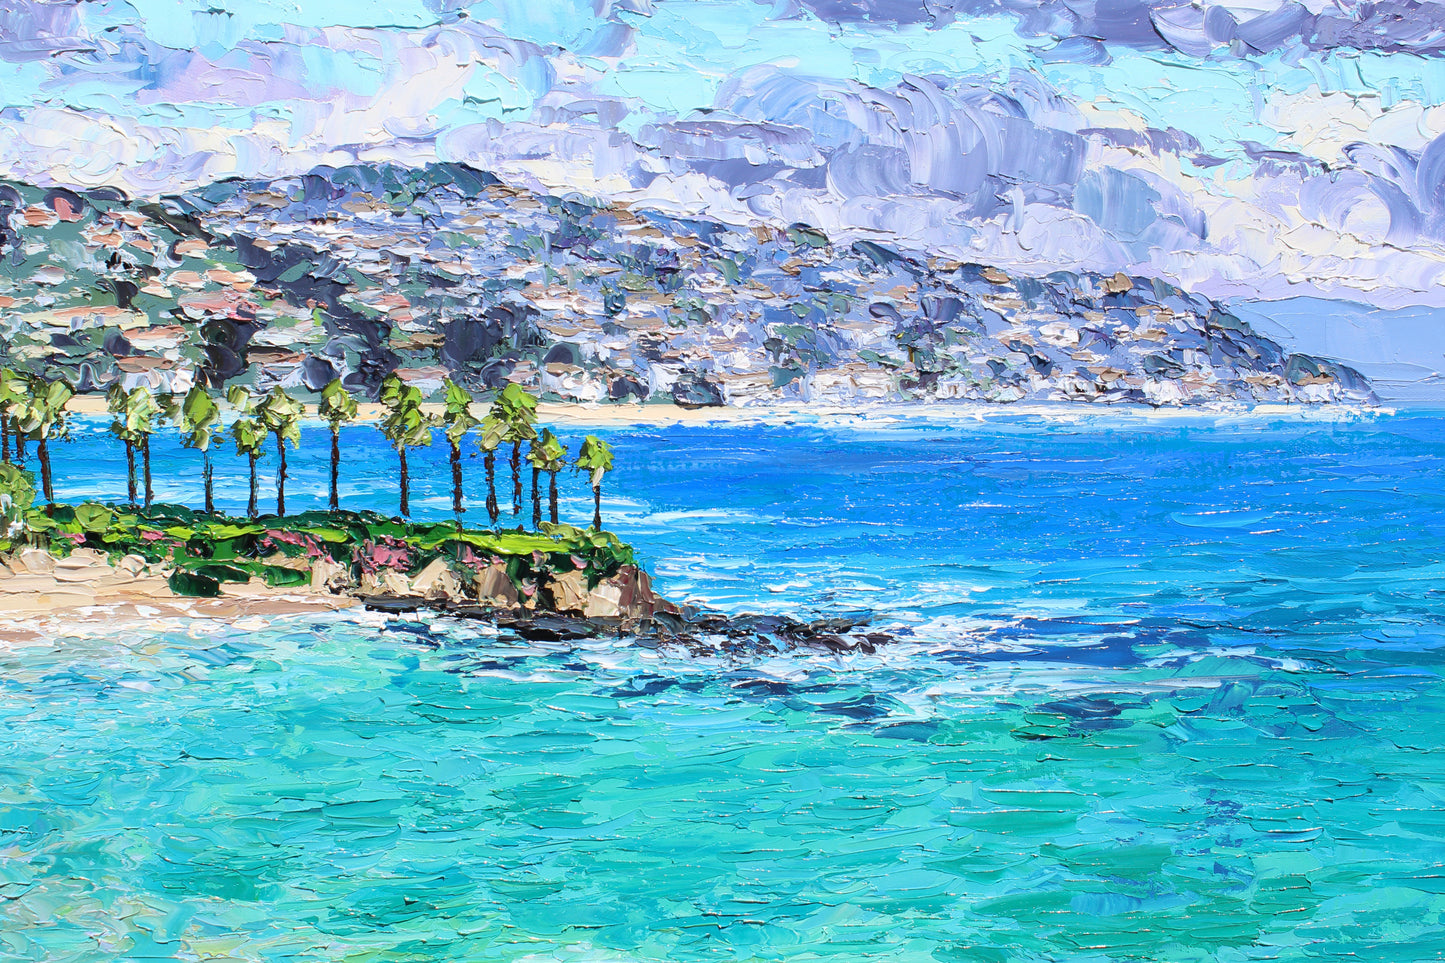 Crescent Bay, After The Rain, Original 30" x 40" Oil On Canvas